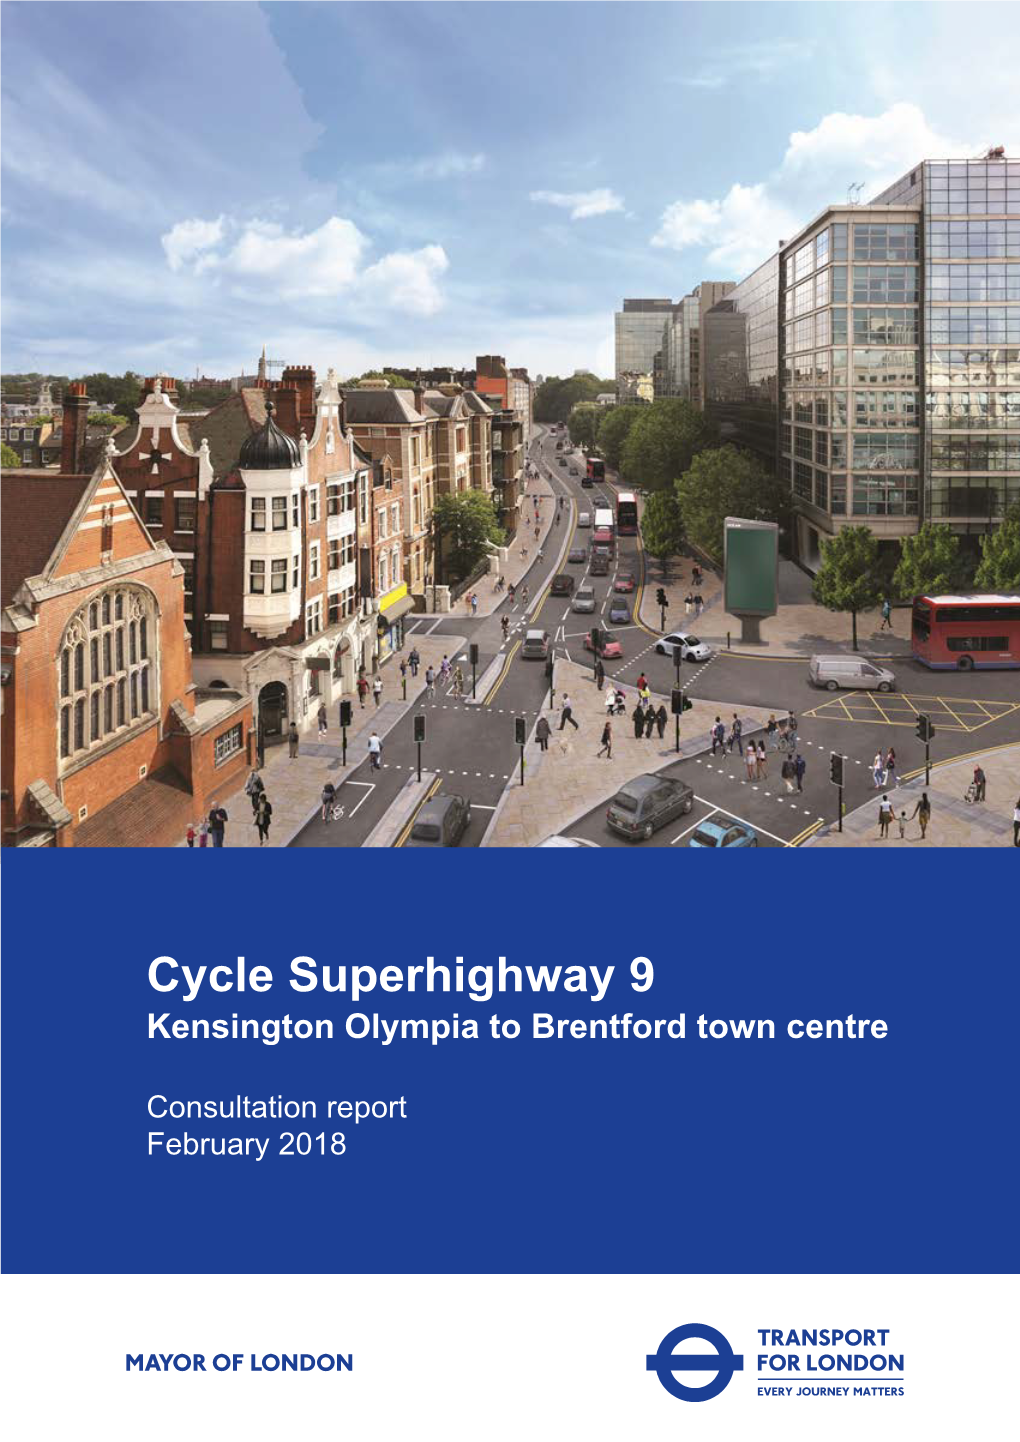 Cycle Superhighway 9 Consultation Report